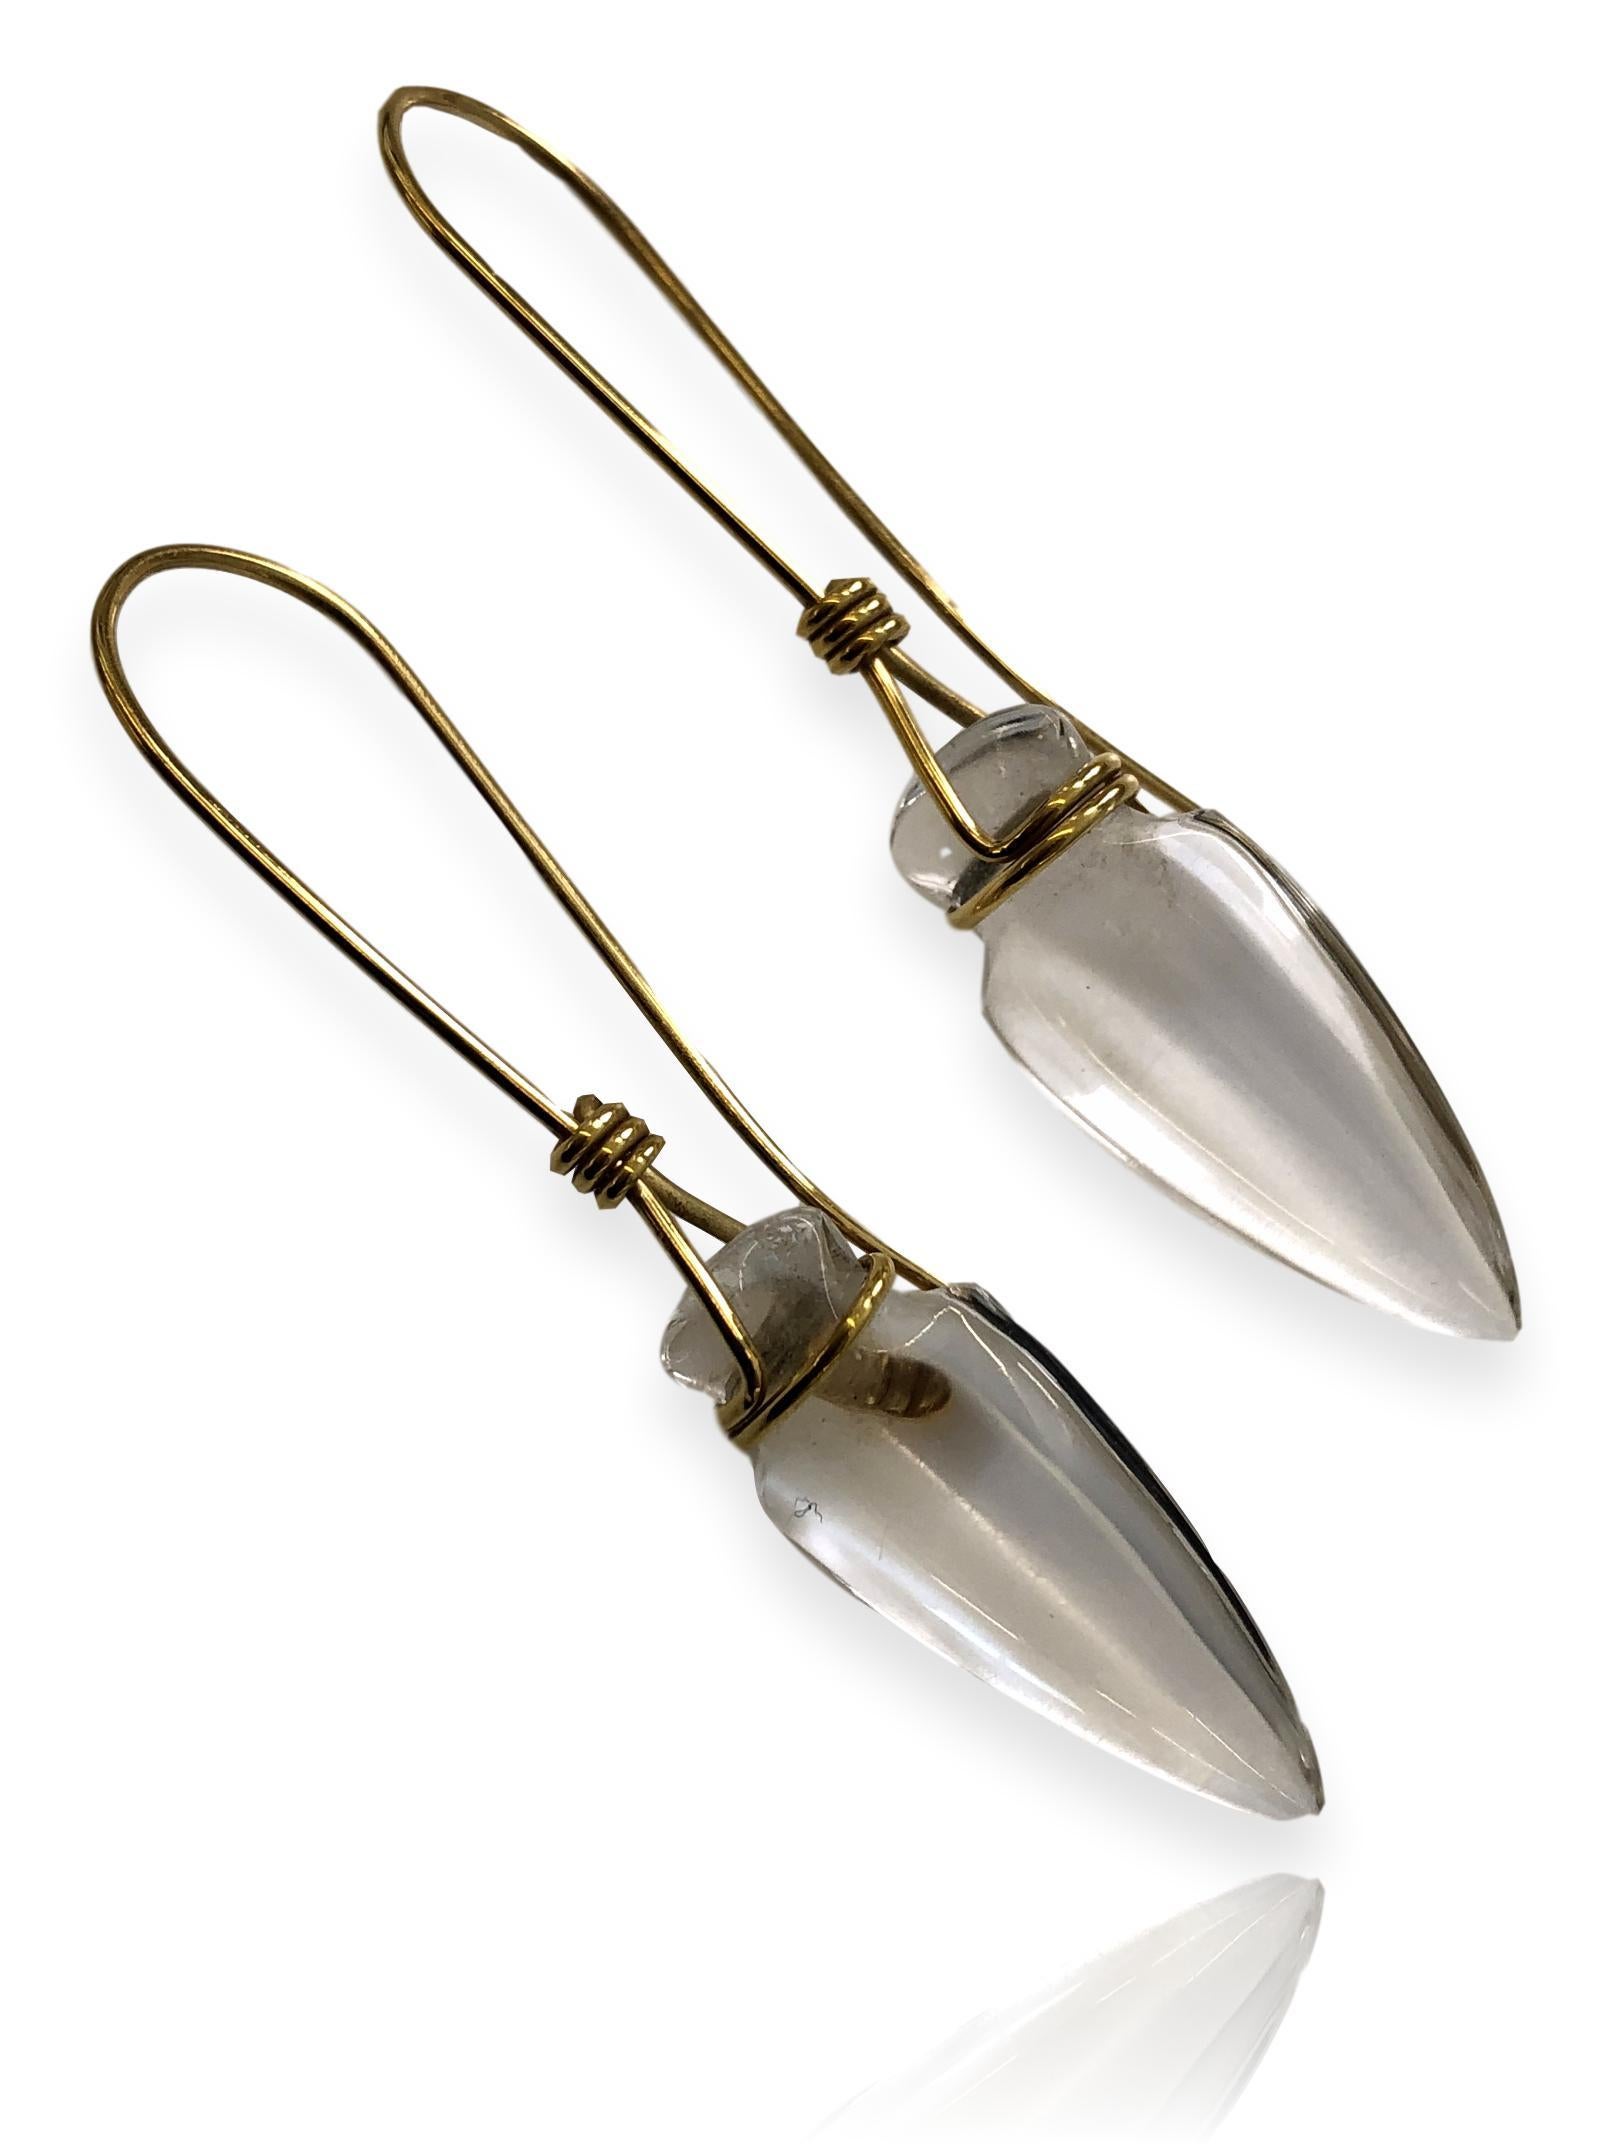 Rock crystal earrings by the legendary Tina Chow. The 18k 2 1/2